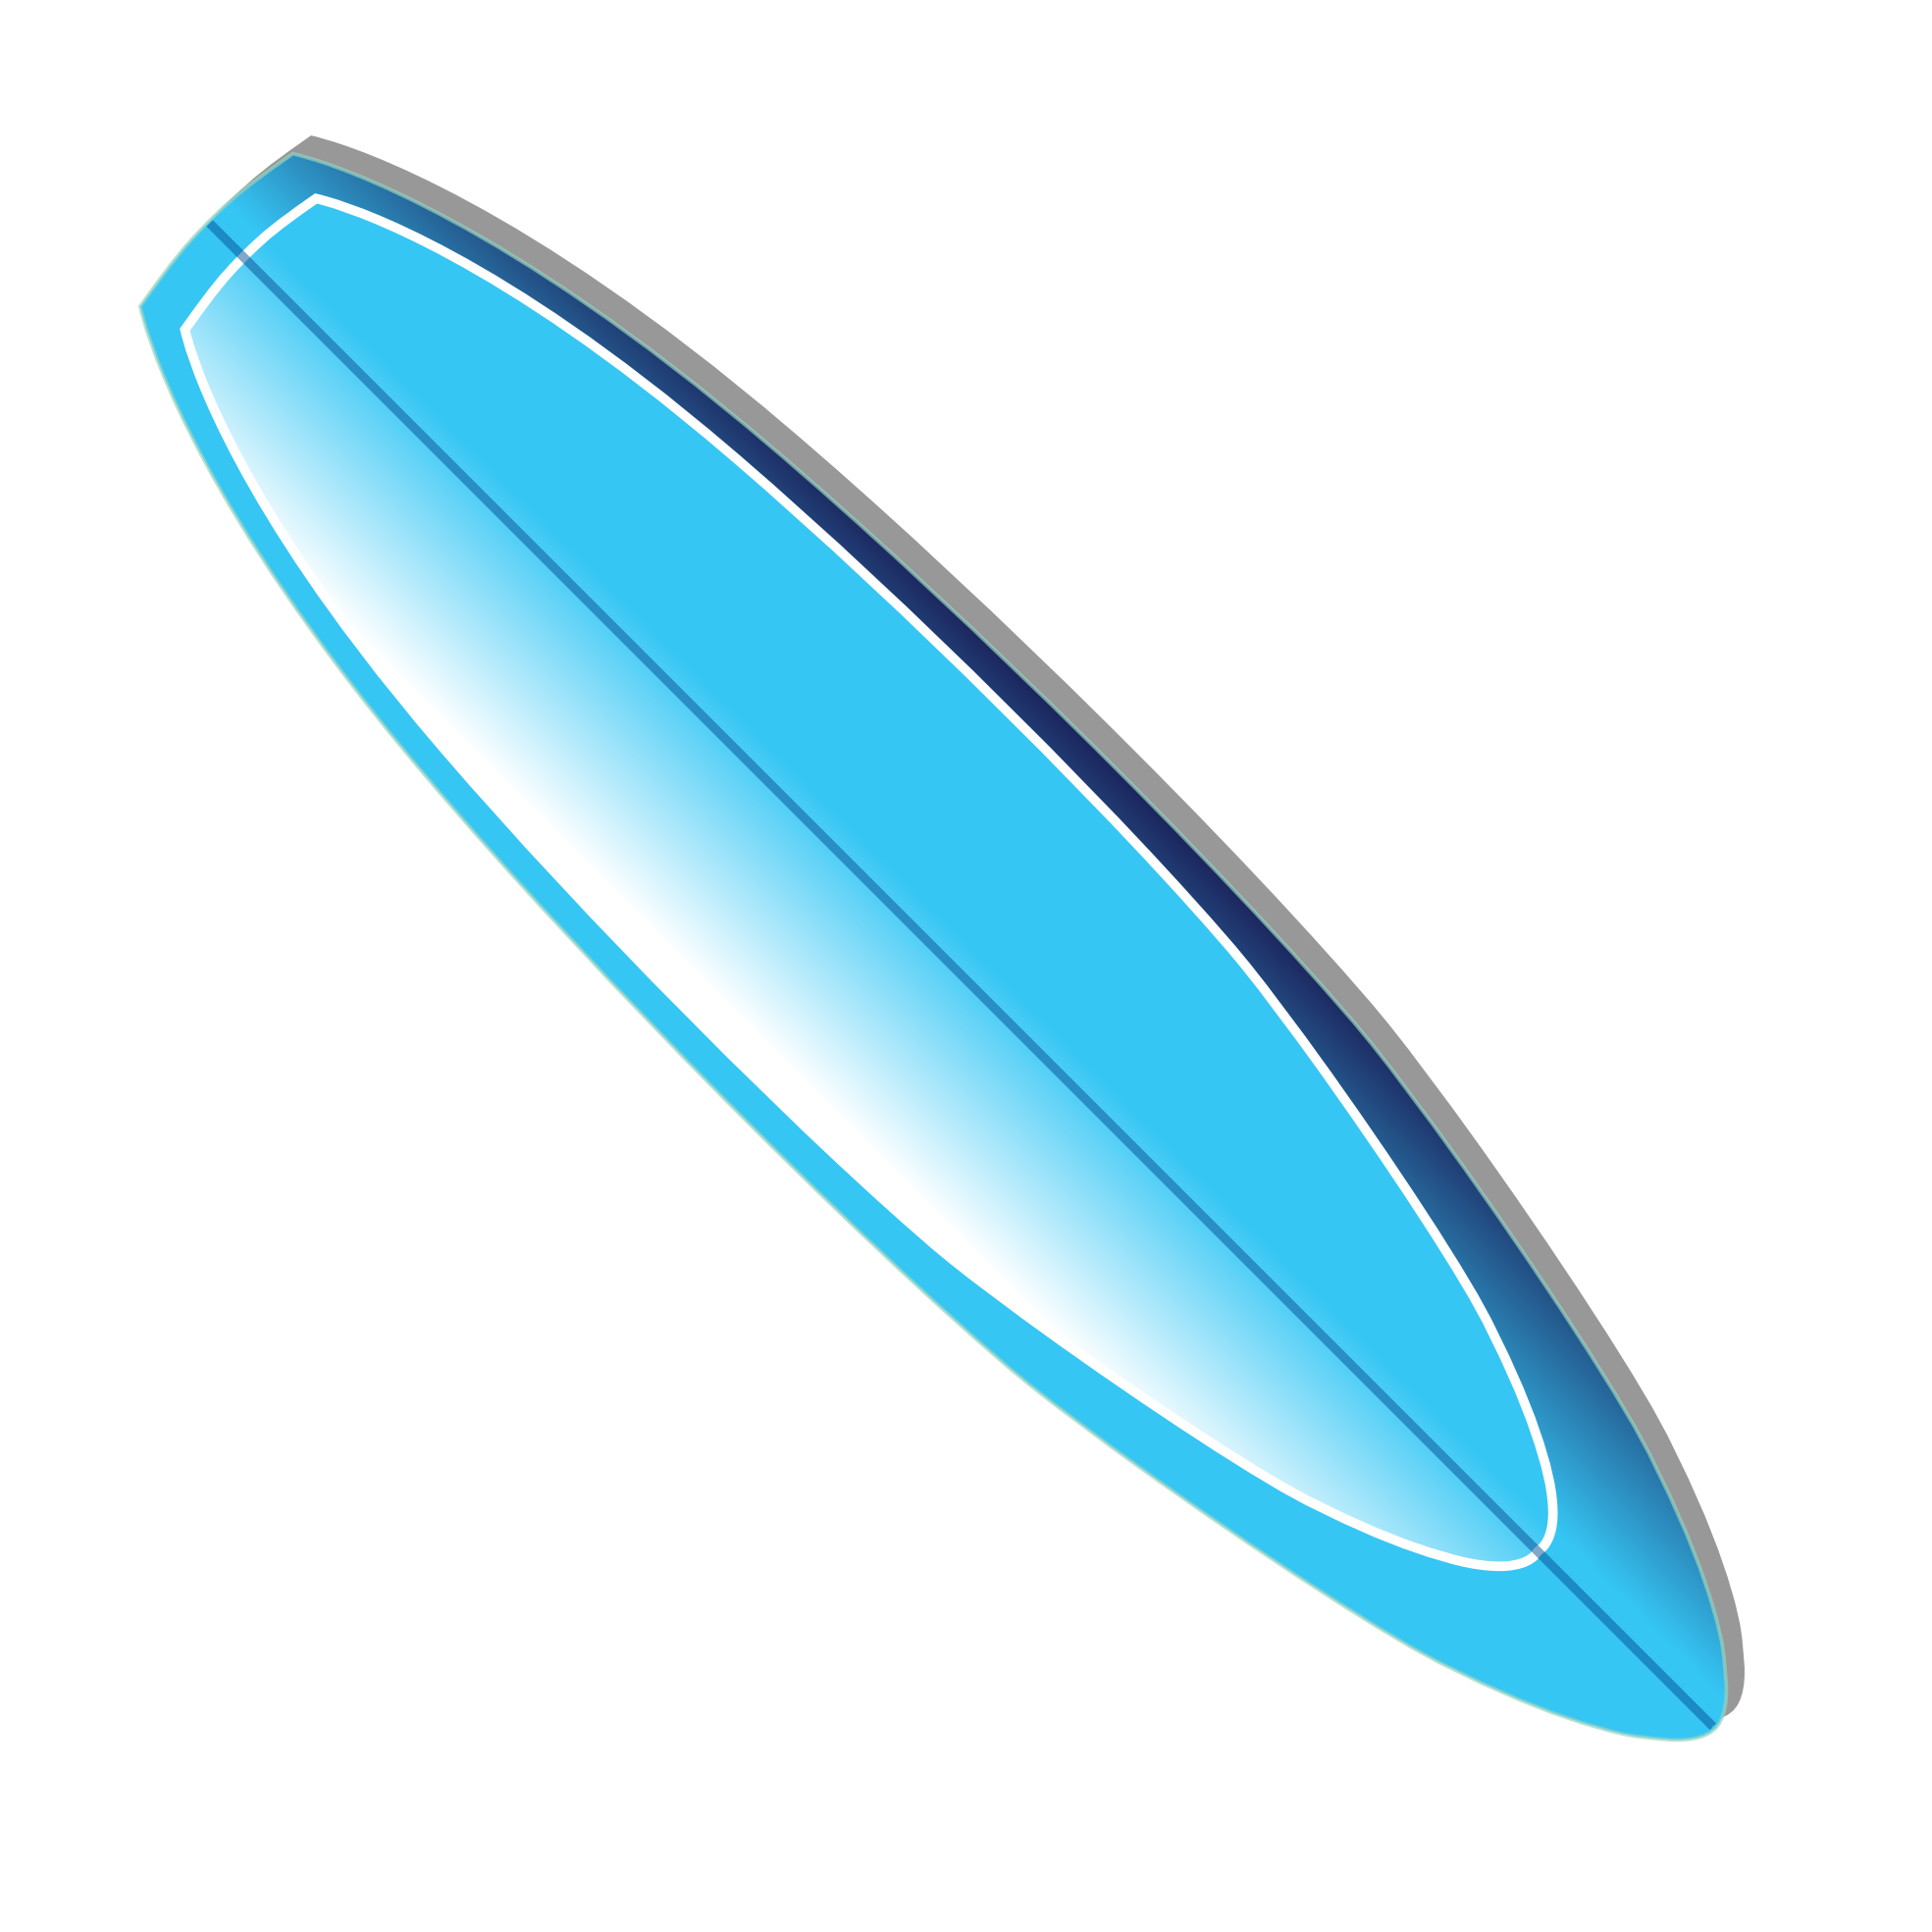 Image - Fire Surfboard.png | 